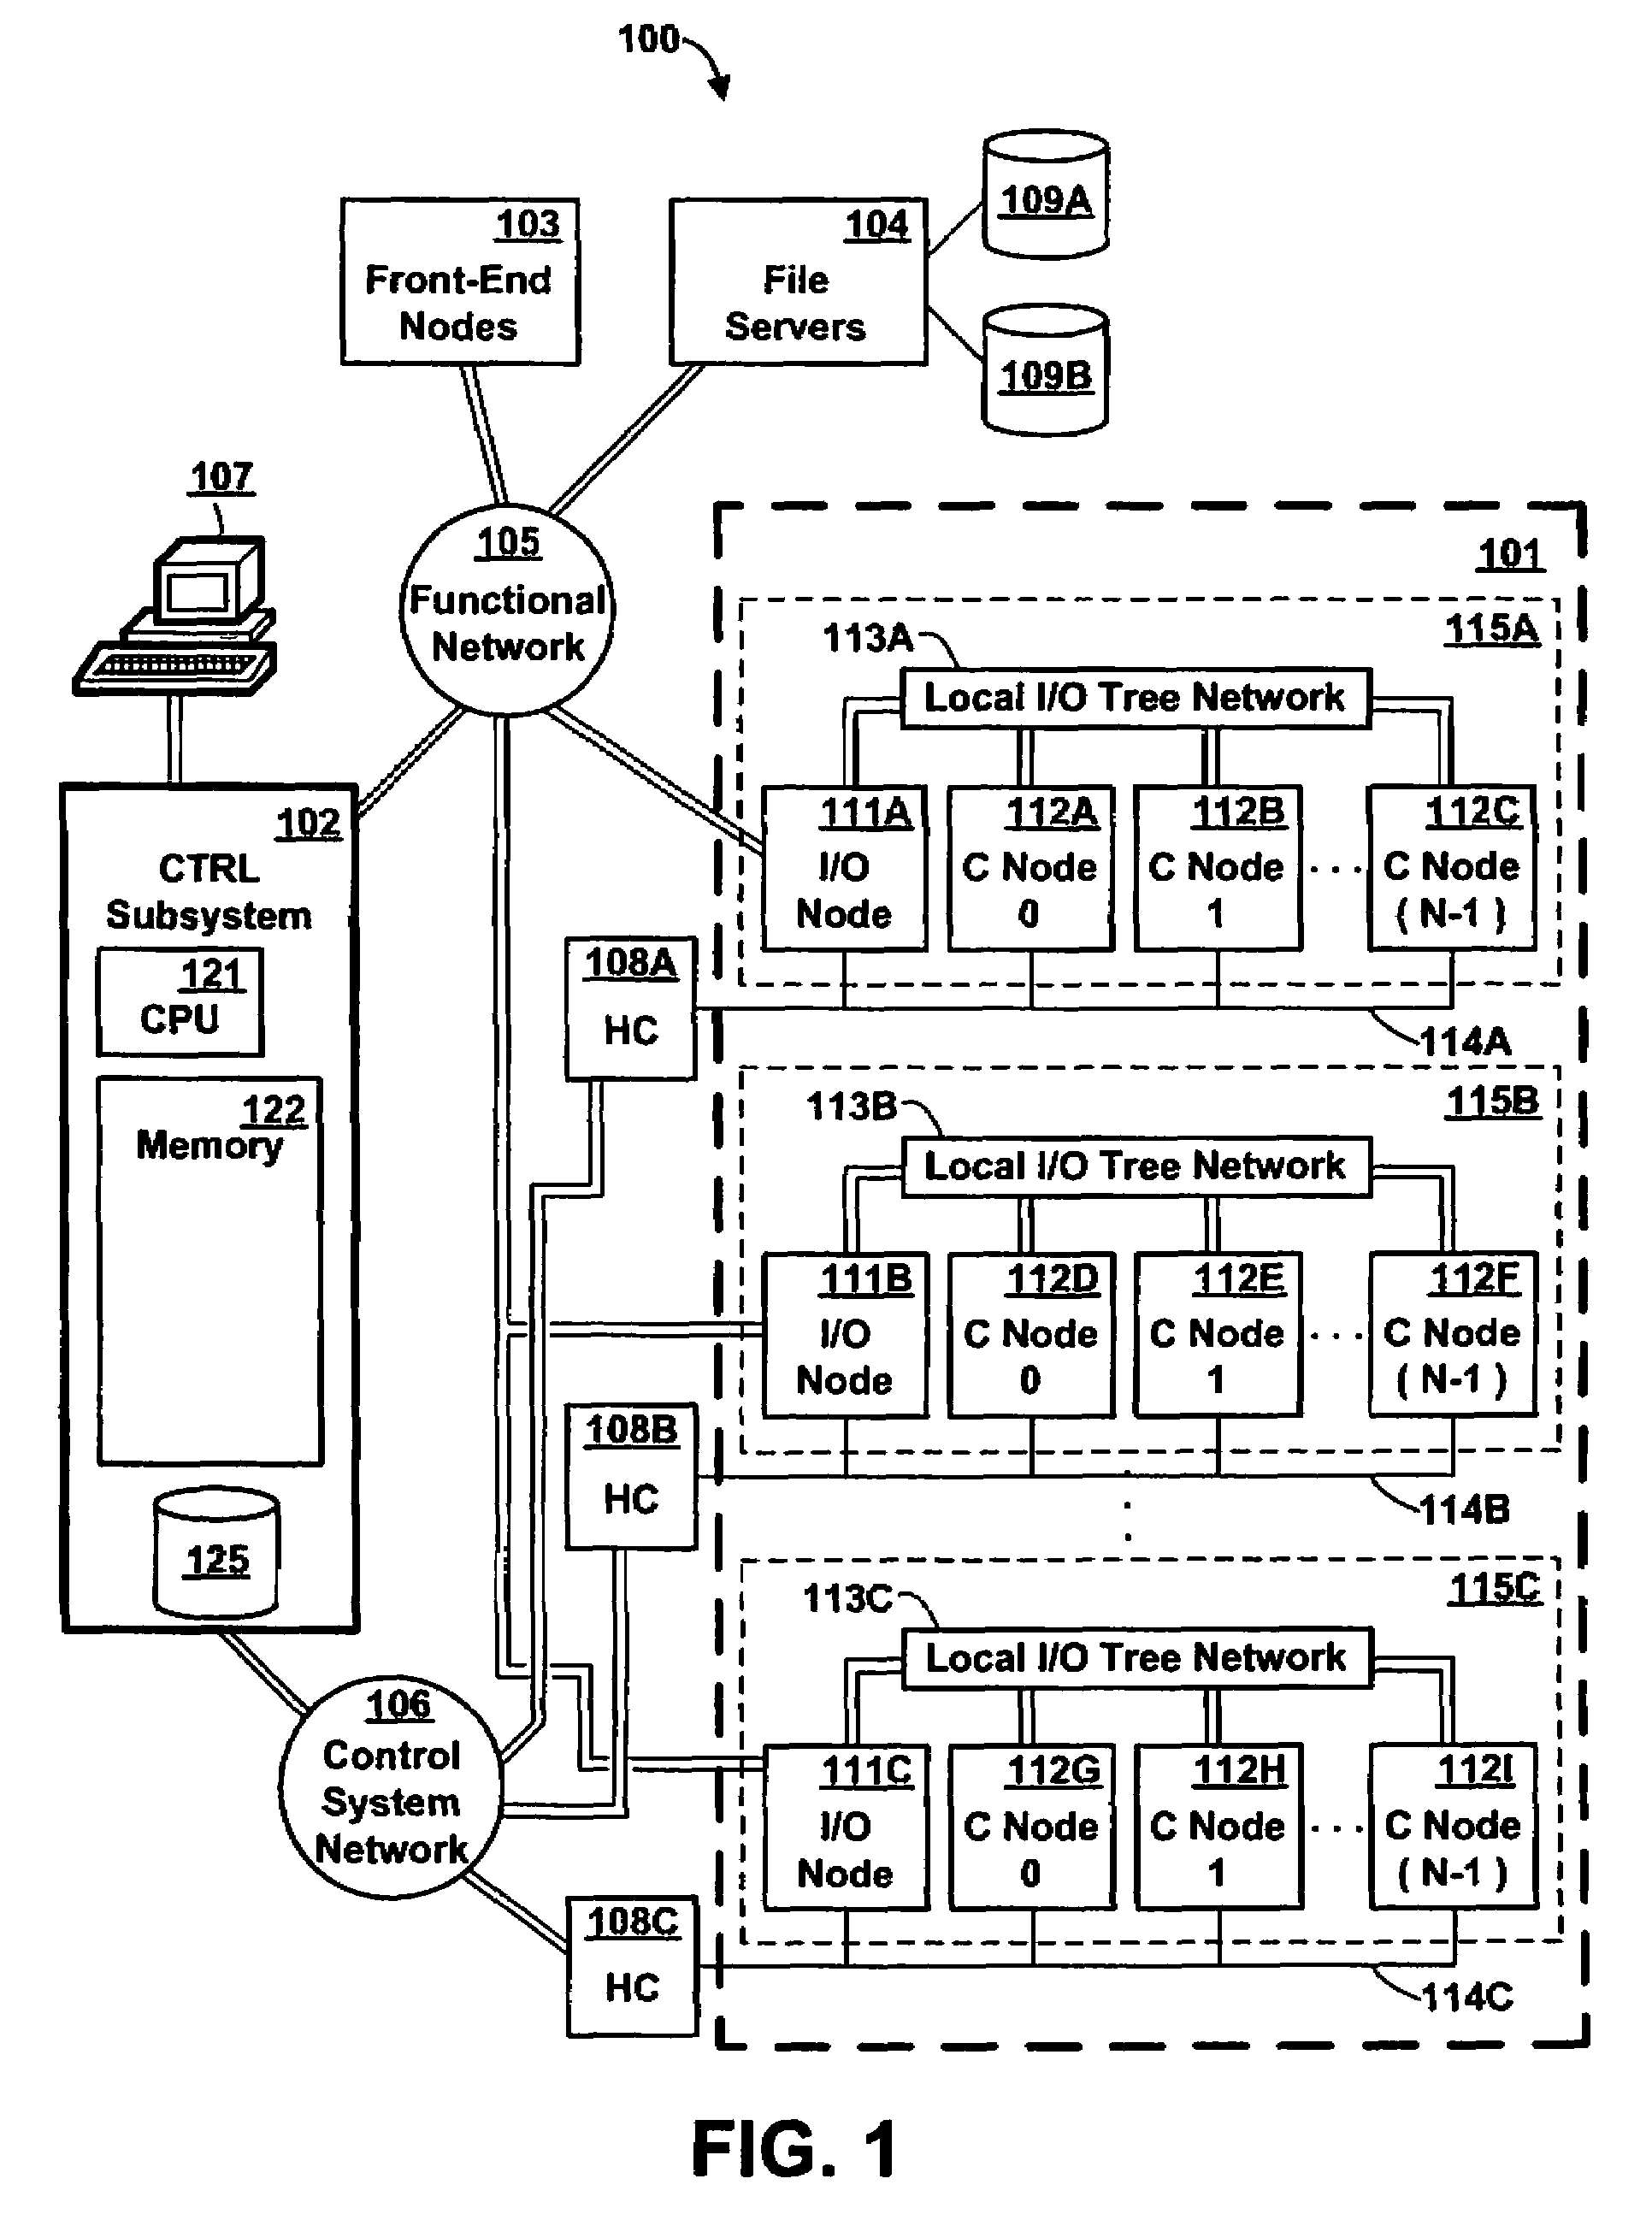 Method and Apparatus for Subdividing Local Memory in Nodes of a Massively Parallel Computer System